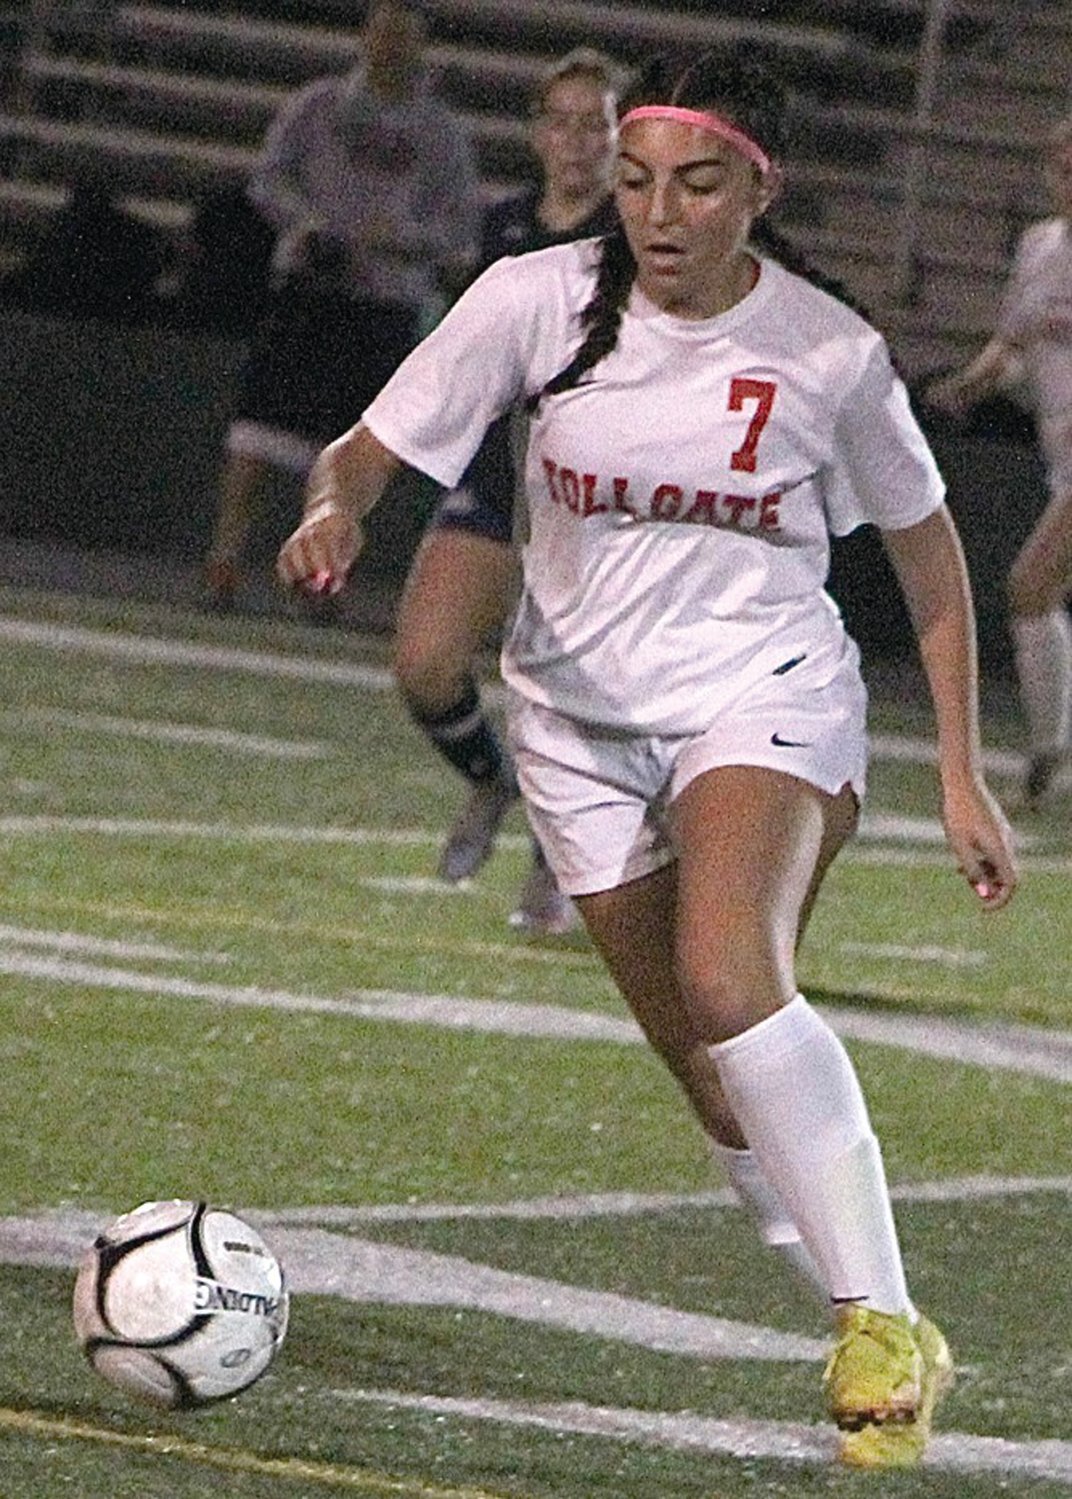 SECOND IN THREE YEARS: Toll Gate’s Ava Ficher takes the ball up the field.